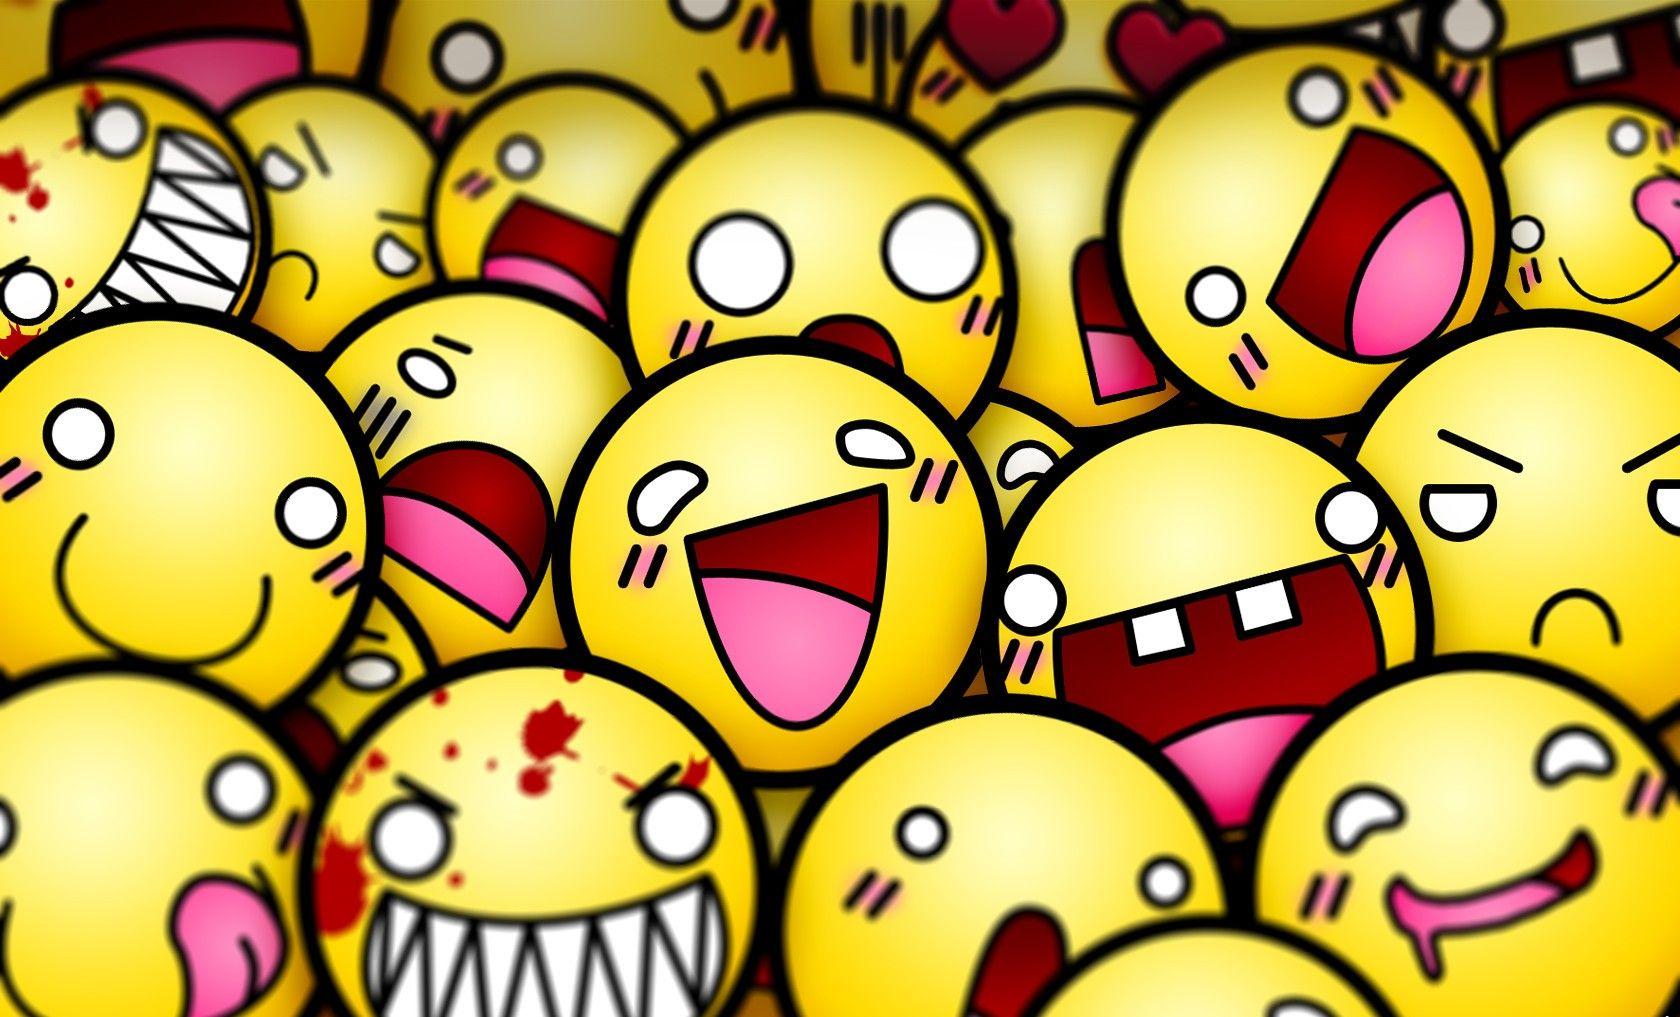 funny smiley faces - Image And Wallpaper free to download